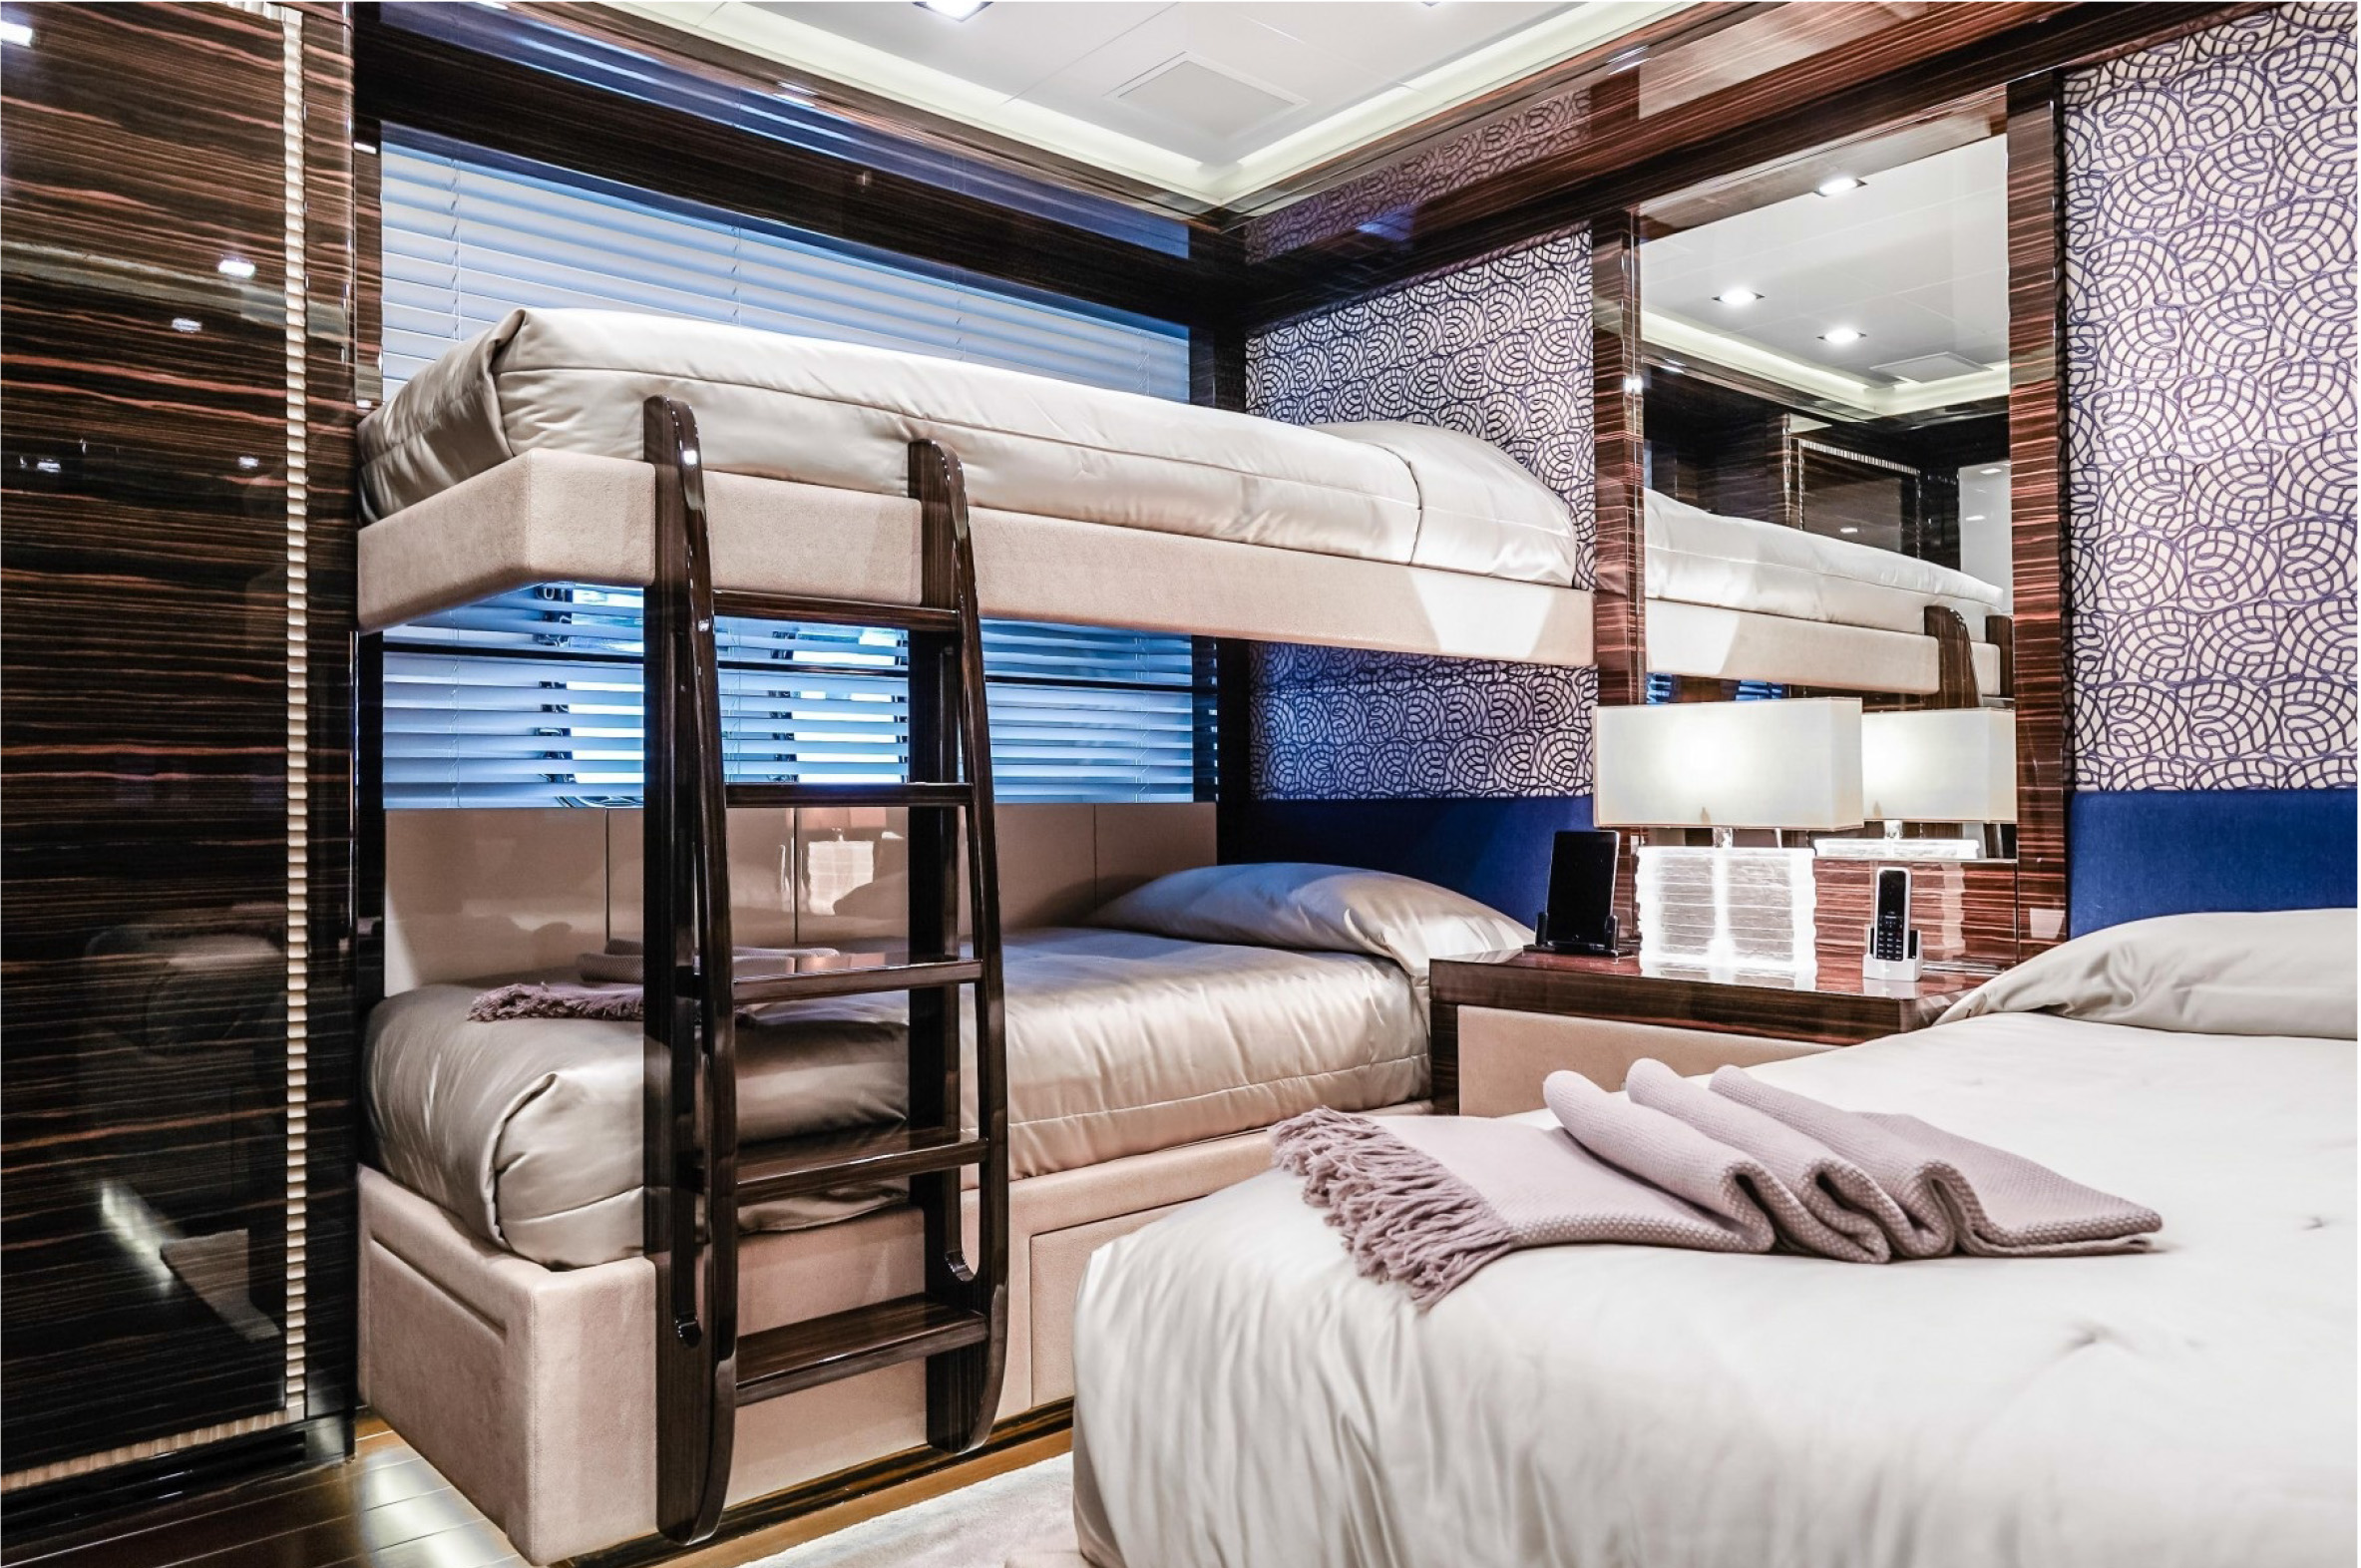 Incognito interior bedroom with bunks